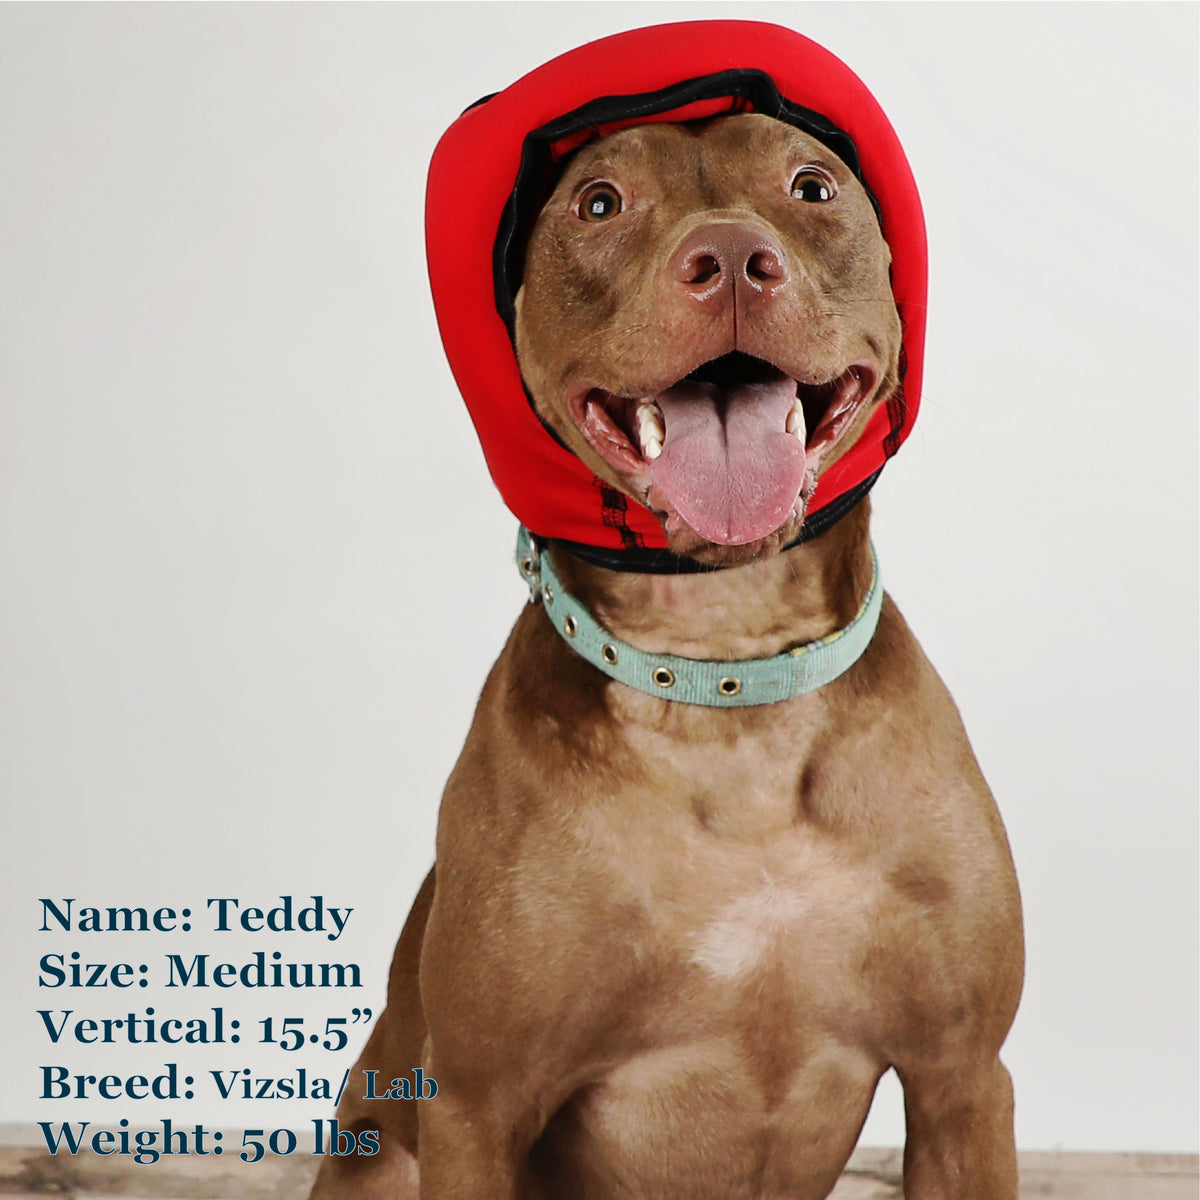 Teddy is a Vizsula Lab Mix in a Medium Red PAWNIX Noise Cancelling Headset for dogs